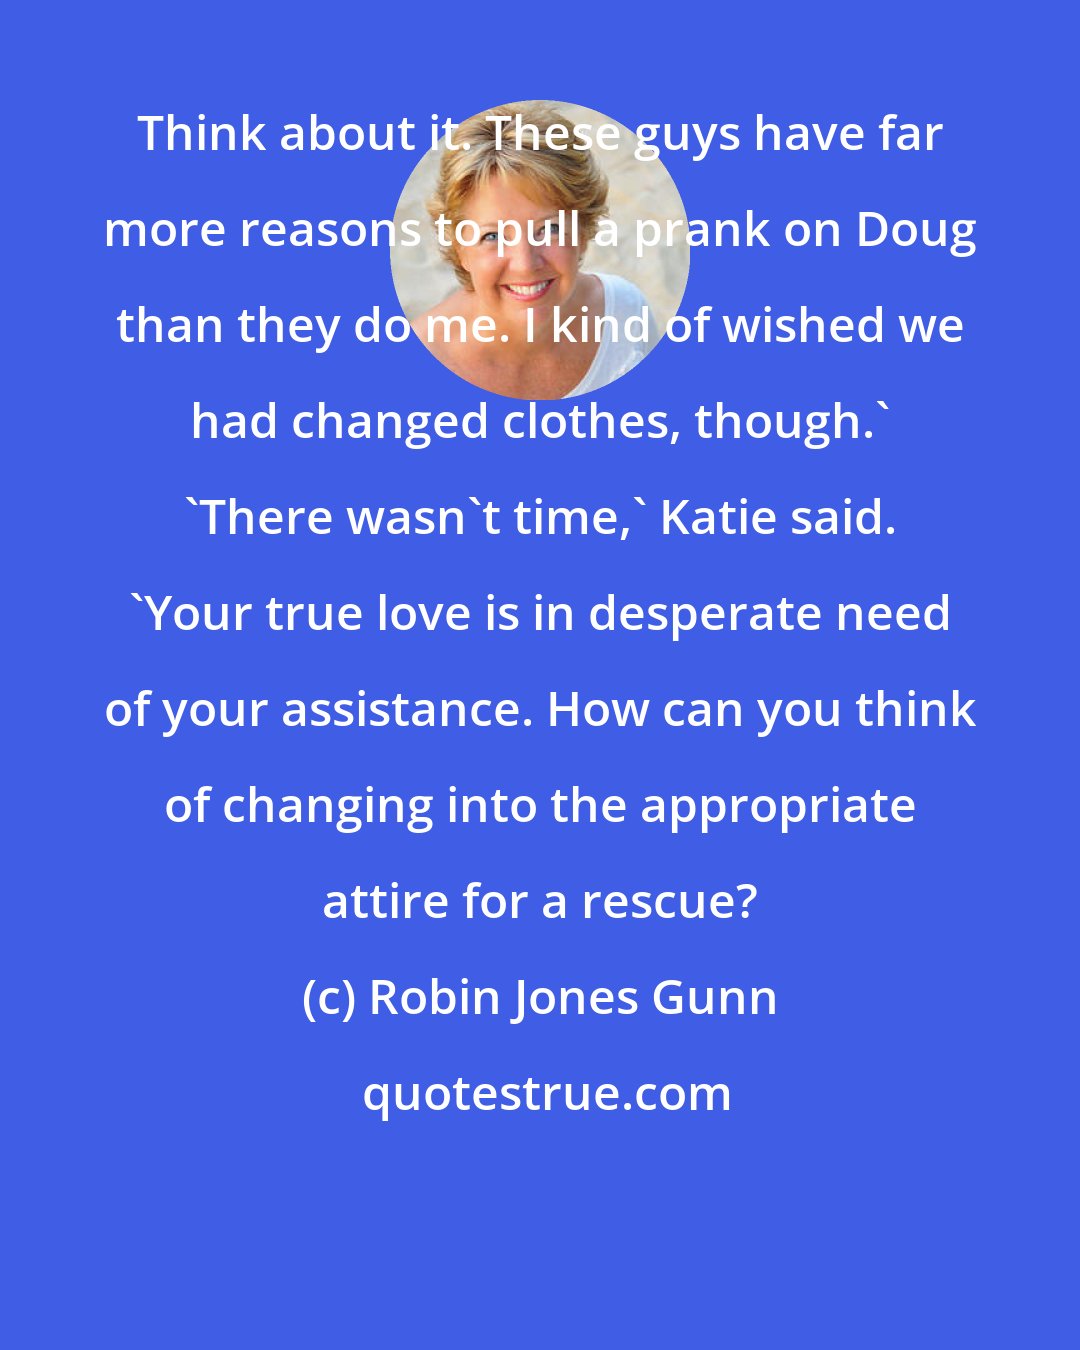 Robin Jones Gunn: Think about it. These guys have far more reasons to pull a prank on Doug than they do me. I kind of wished we had changed clothes, though.' 'There wasn't time,' Katie said. 'Your true love is in desperate need of your assistance. How can you think of changing into the appropriate attire for a rescue?